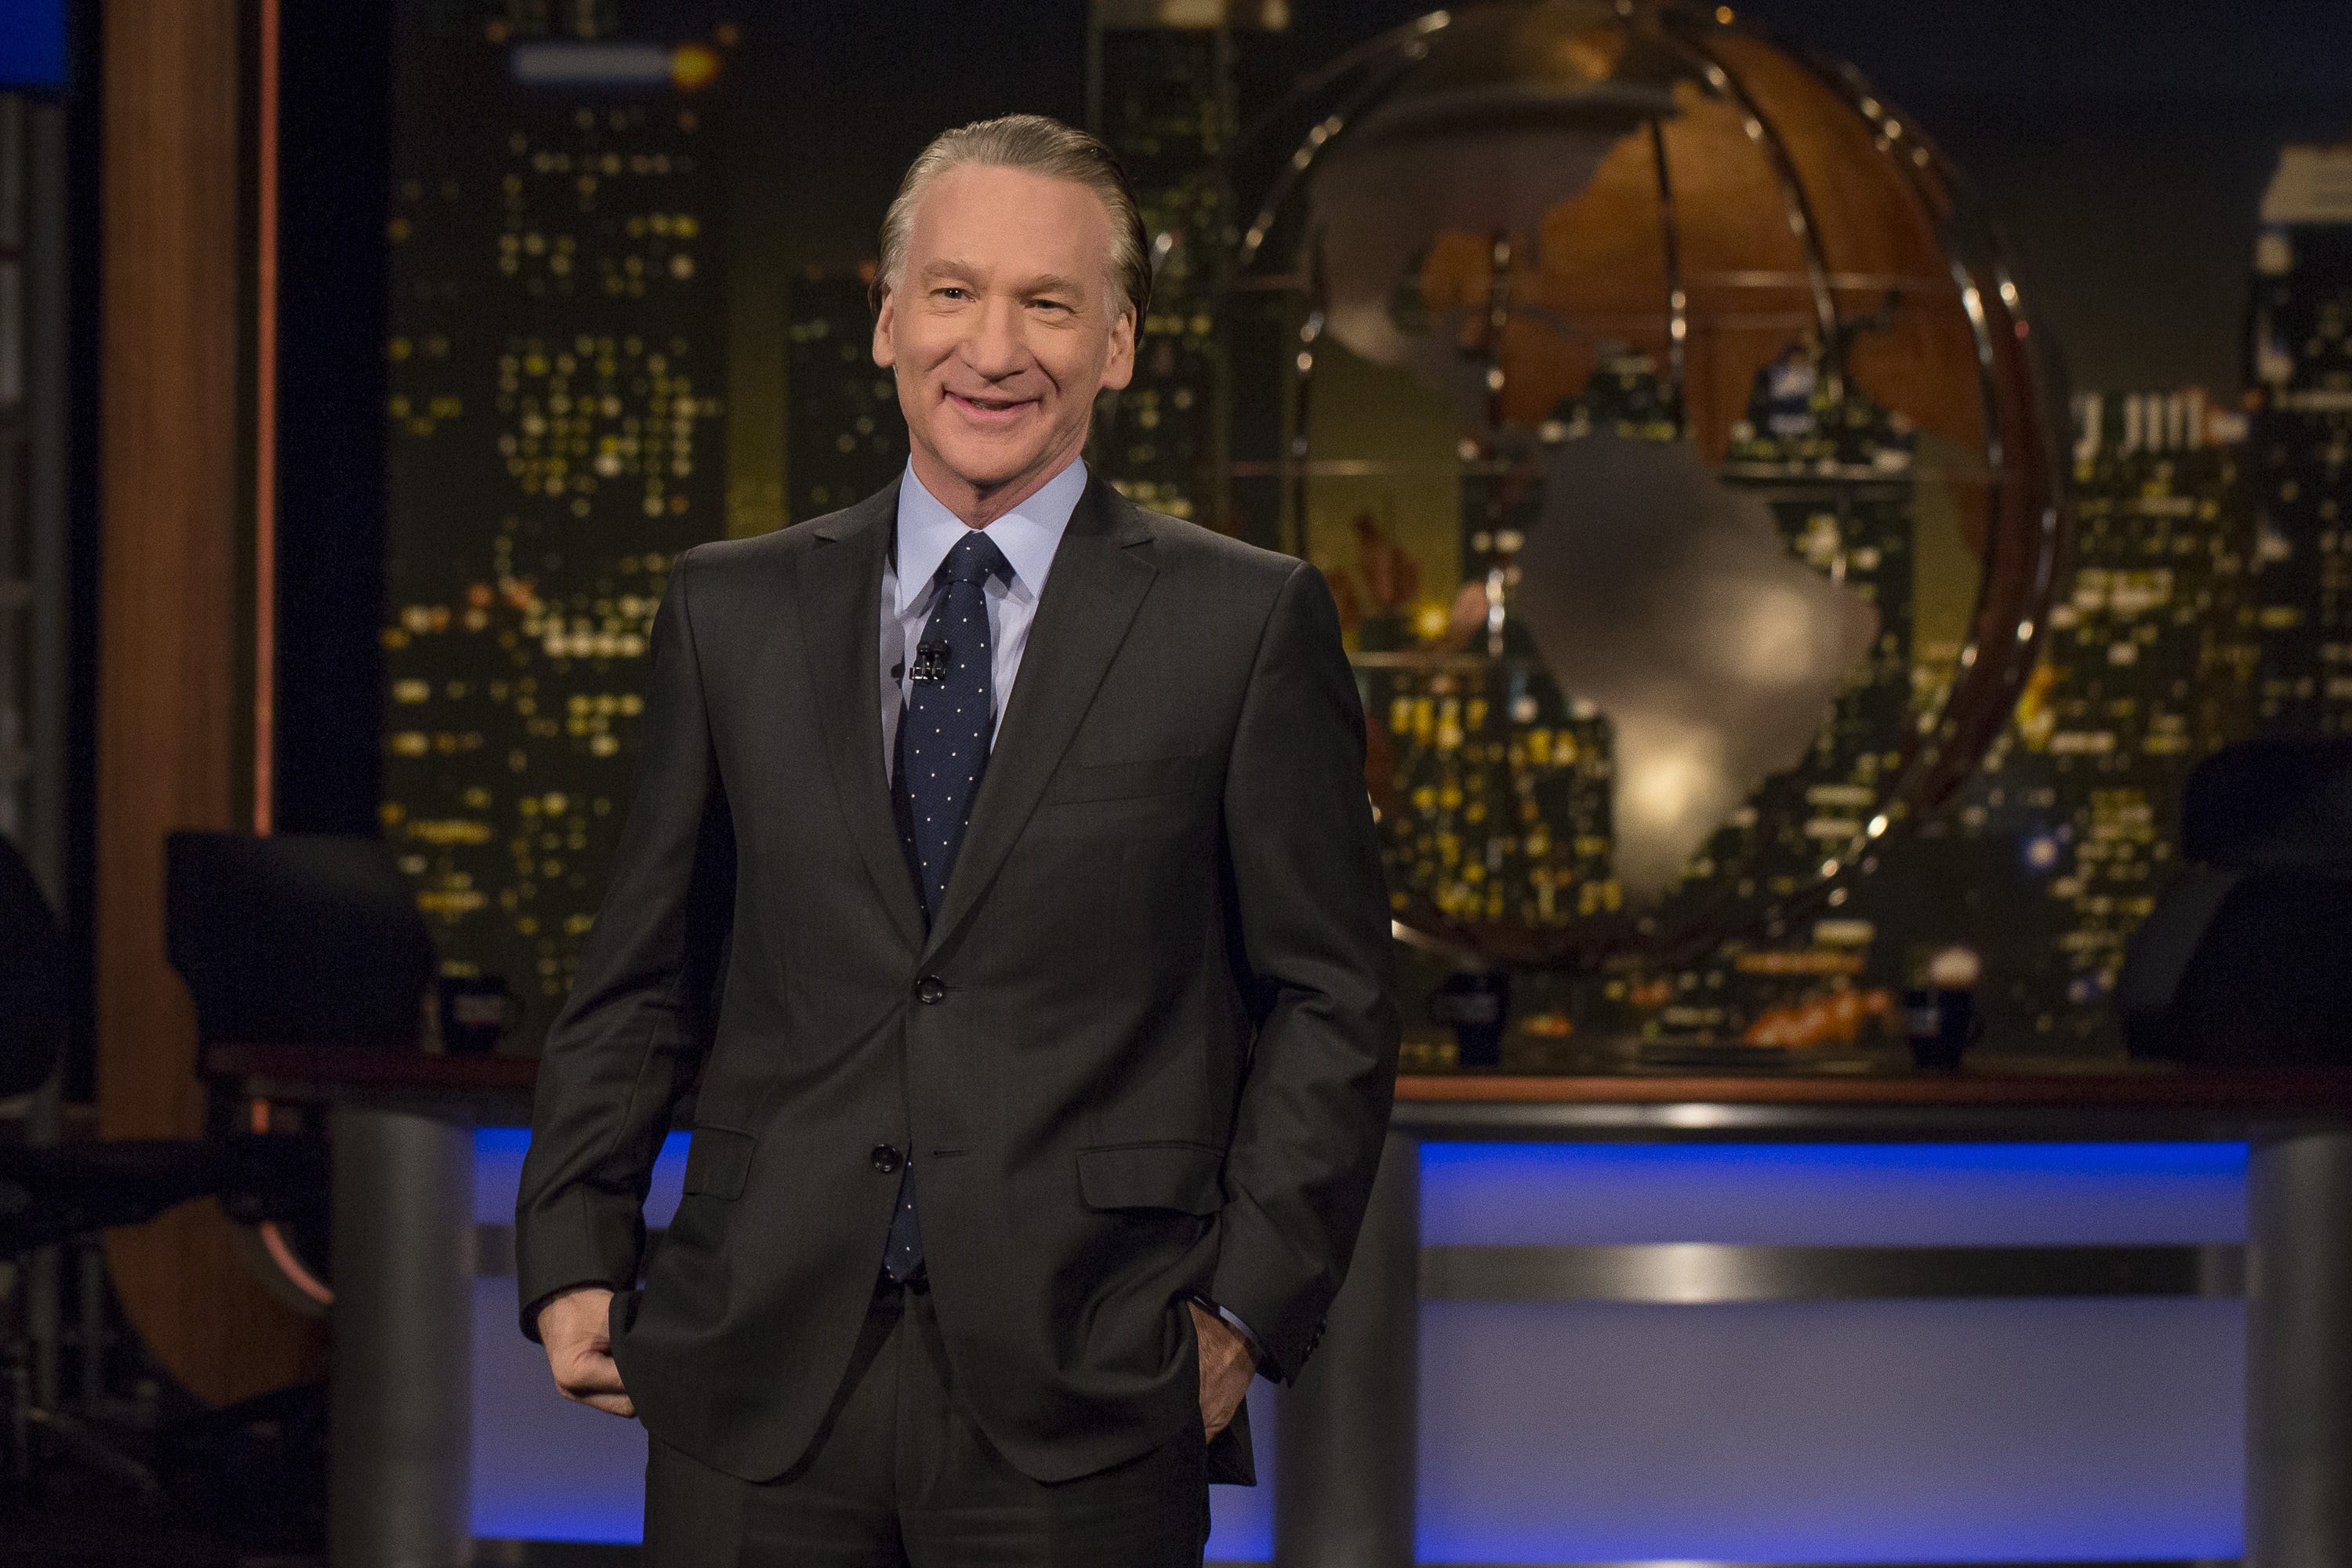 HBO RENEWS REAL TIME WITH BILL MAHER FOR TWO MORE SEASONS, EXTENDING